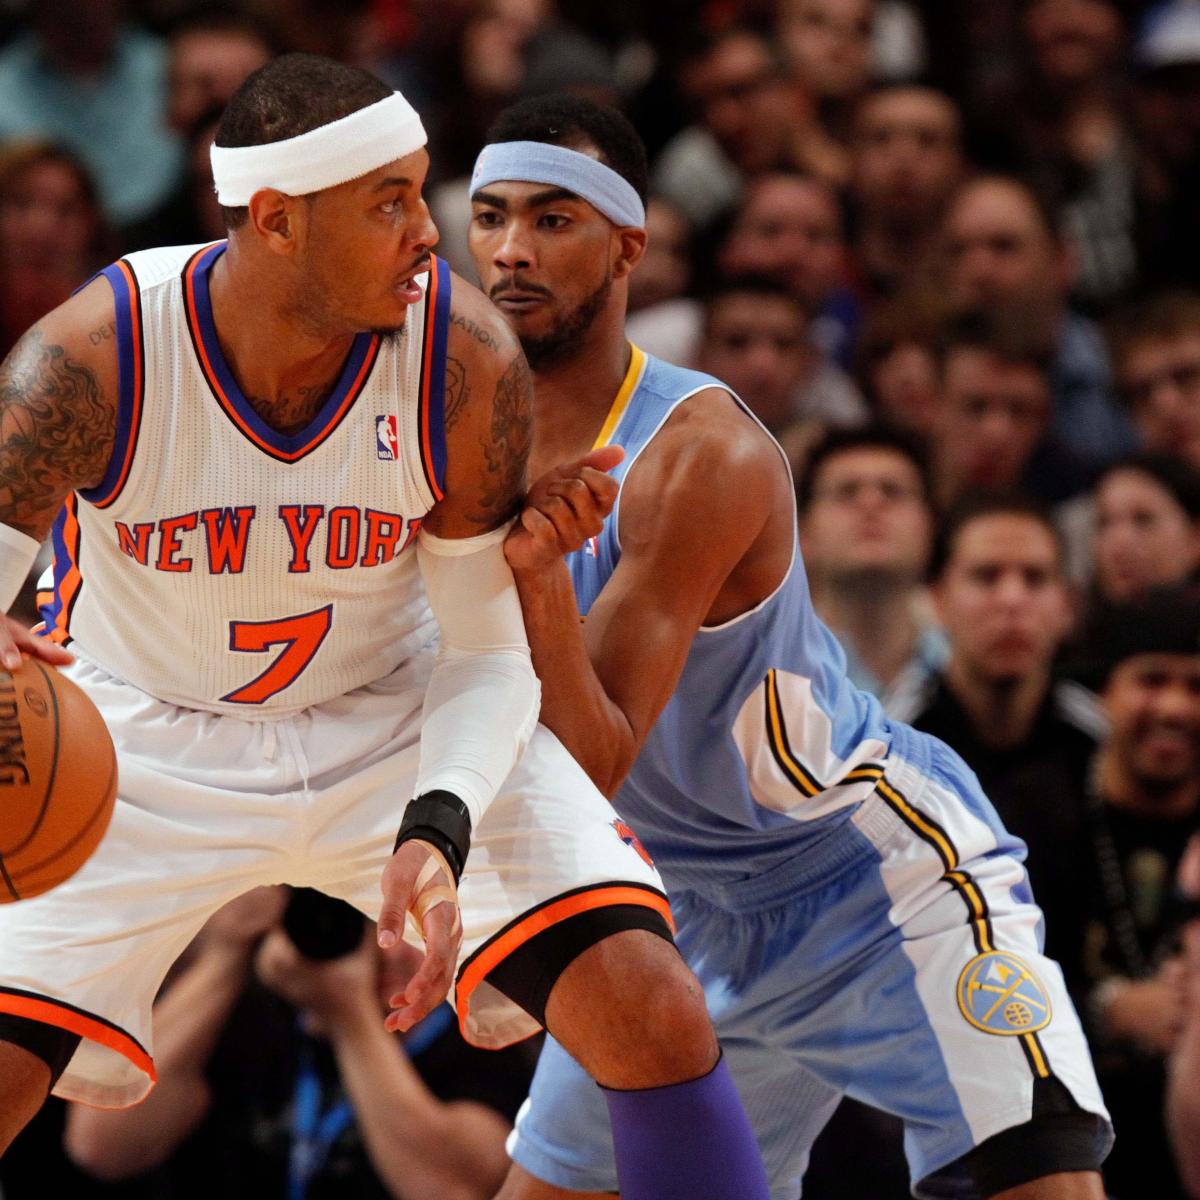 Denver Nuggets vs. New York Knicks Live Score, Results and Game